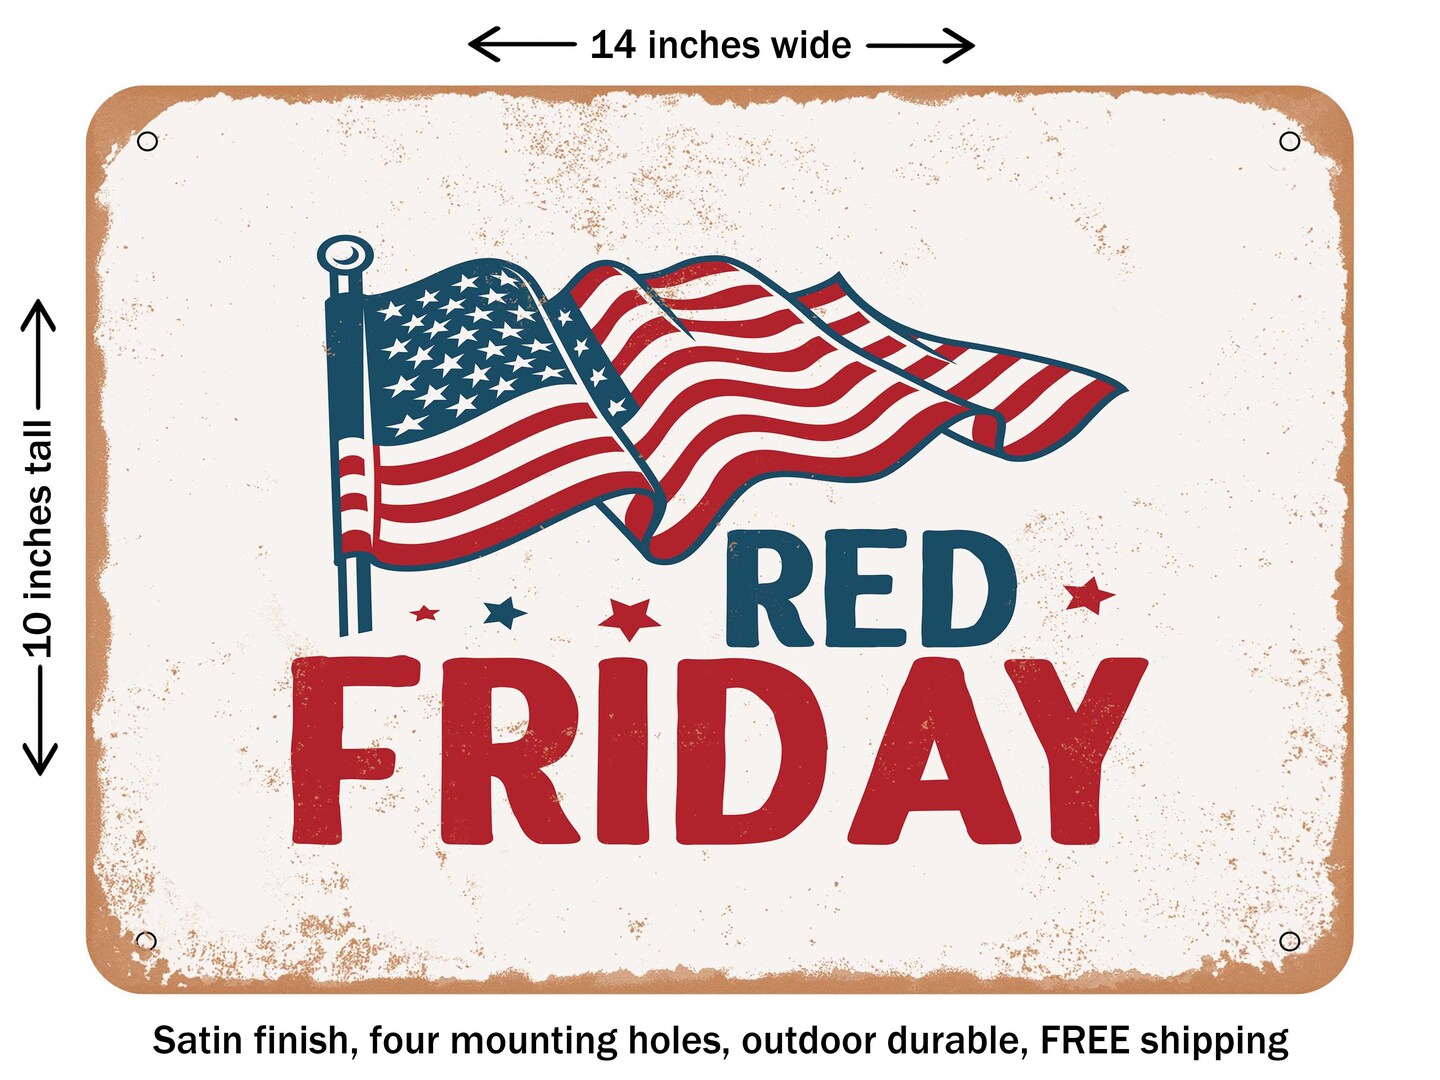 DECORATIVE METAL SIGN - Red Friday - Vintage Rusty Look